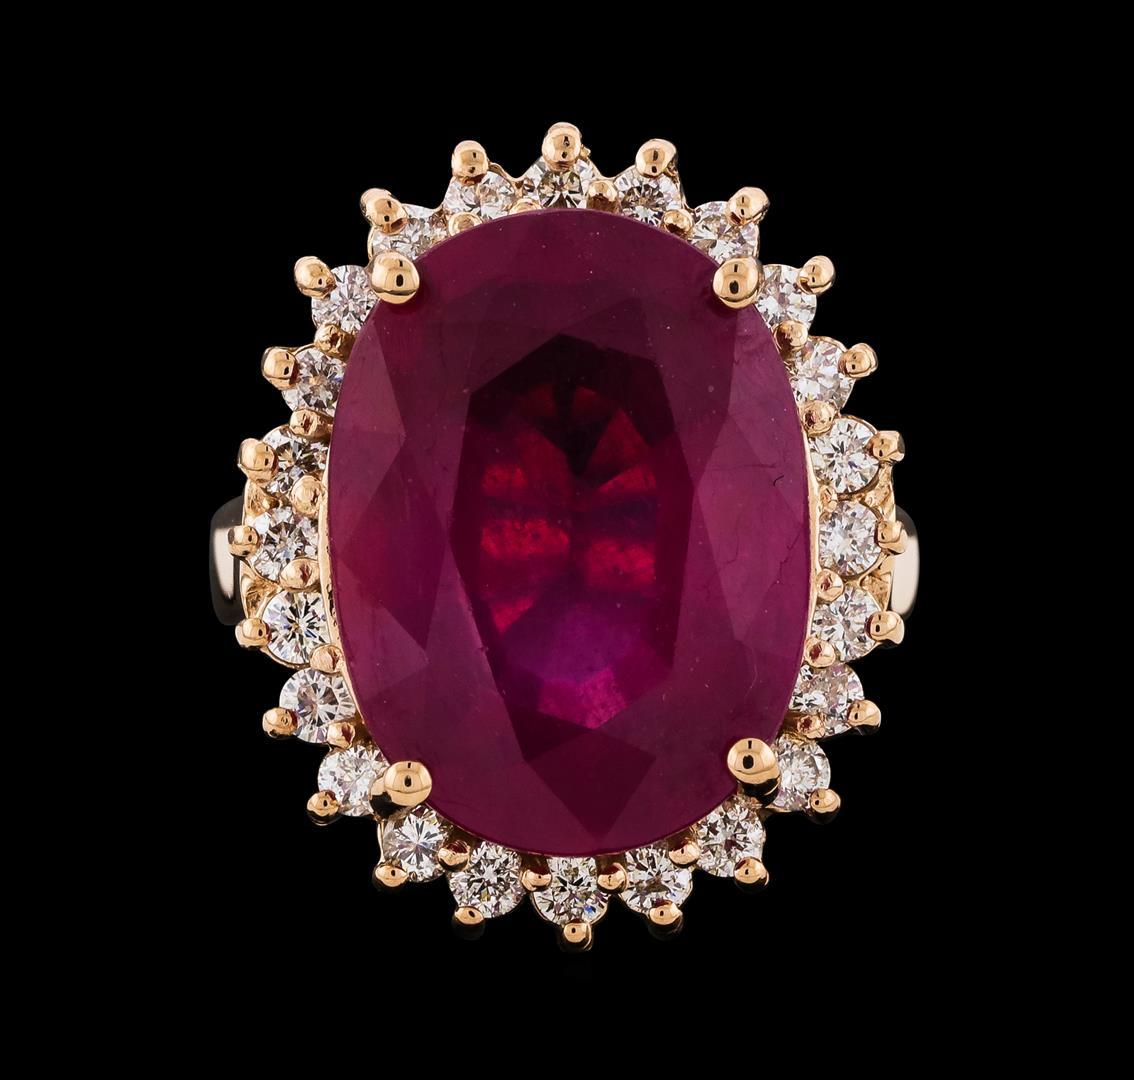 12.95 ctw Ruby and Diamond Ring - 14KT Rose Gold